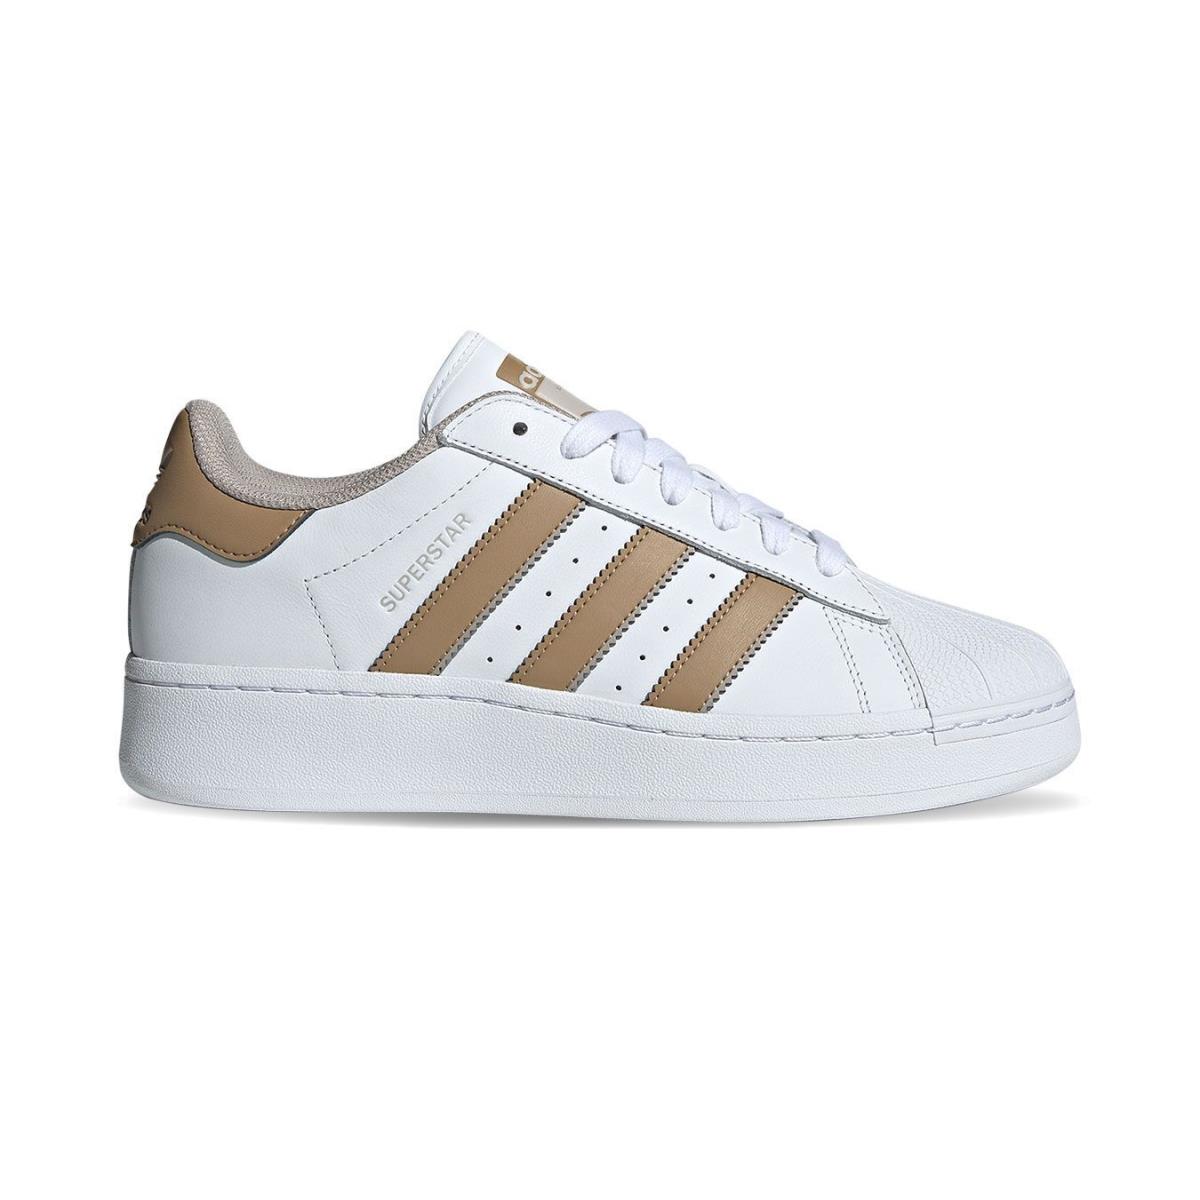 Adidas Originals Superstar Xlg White Cardboard IE0762 Casual Shoes Sneakers